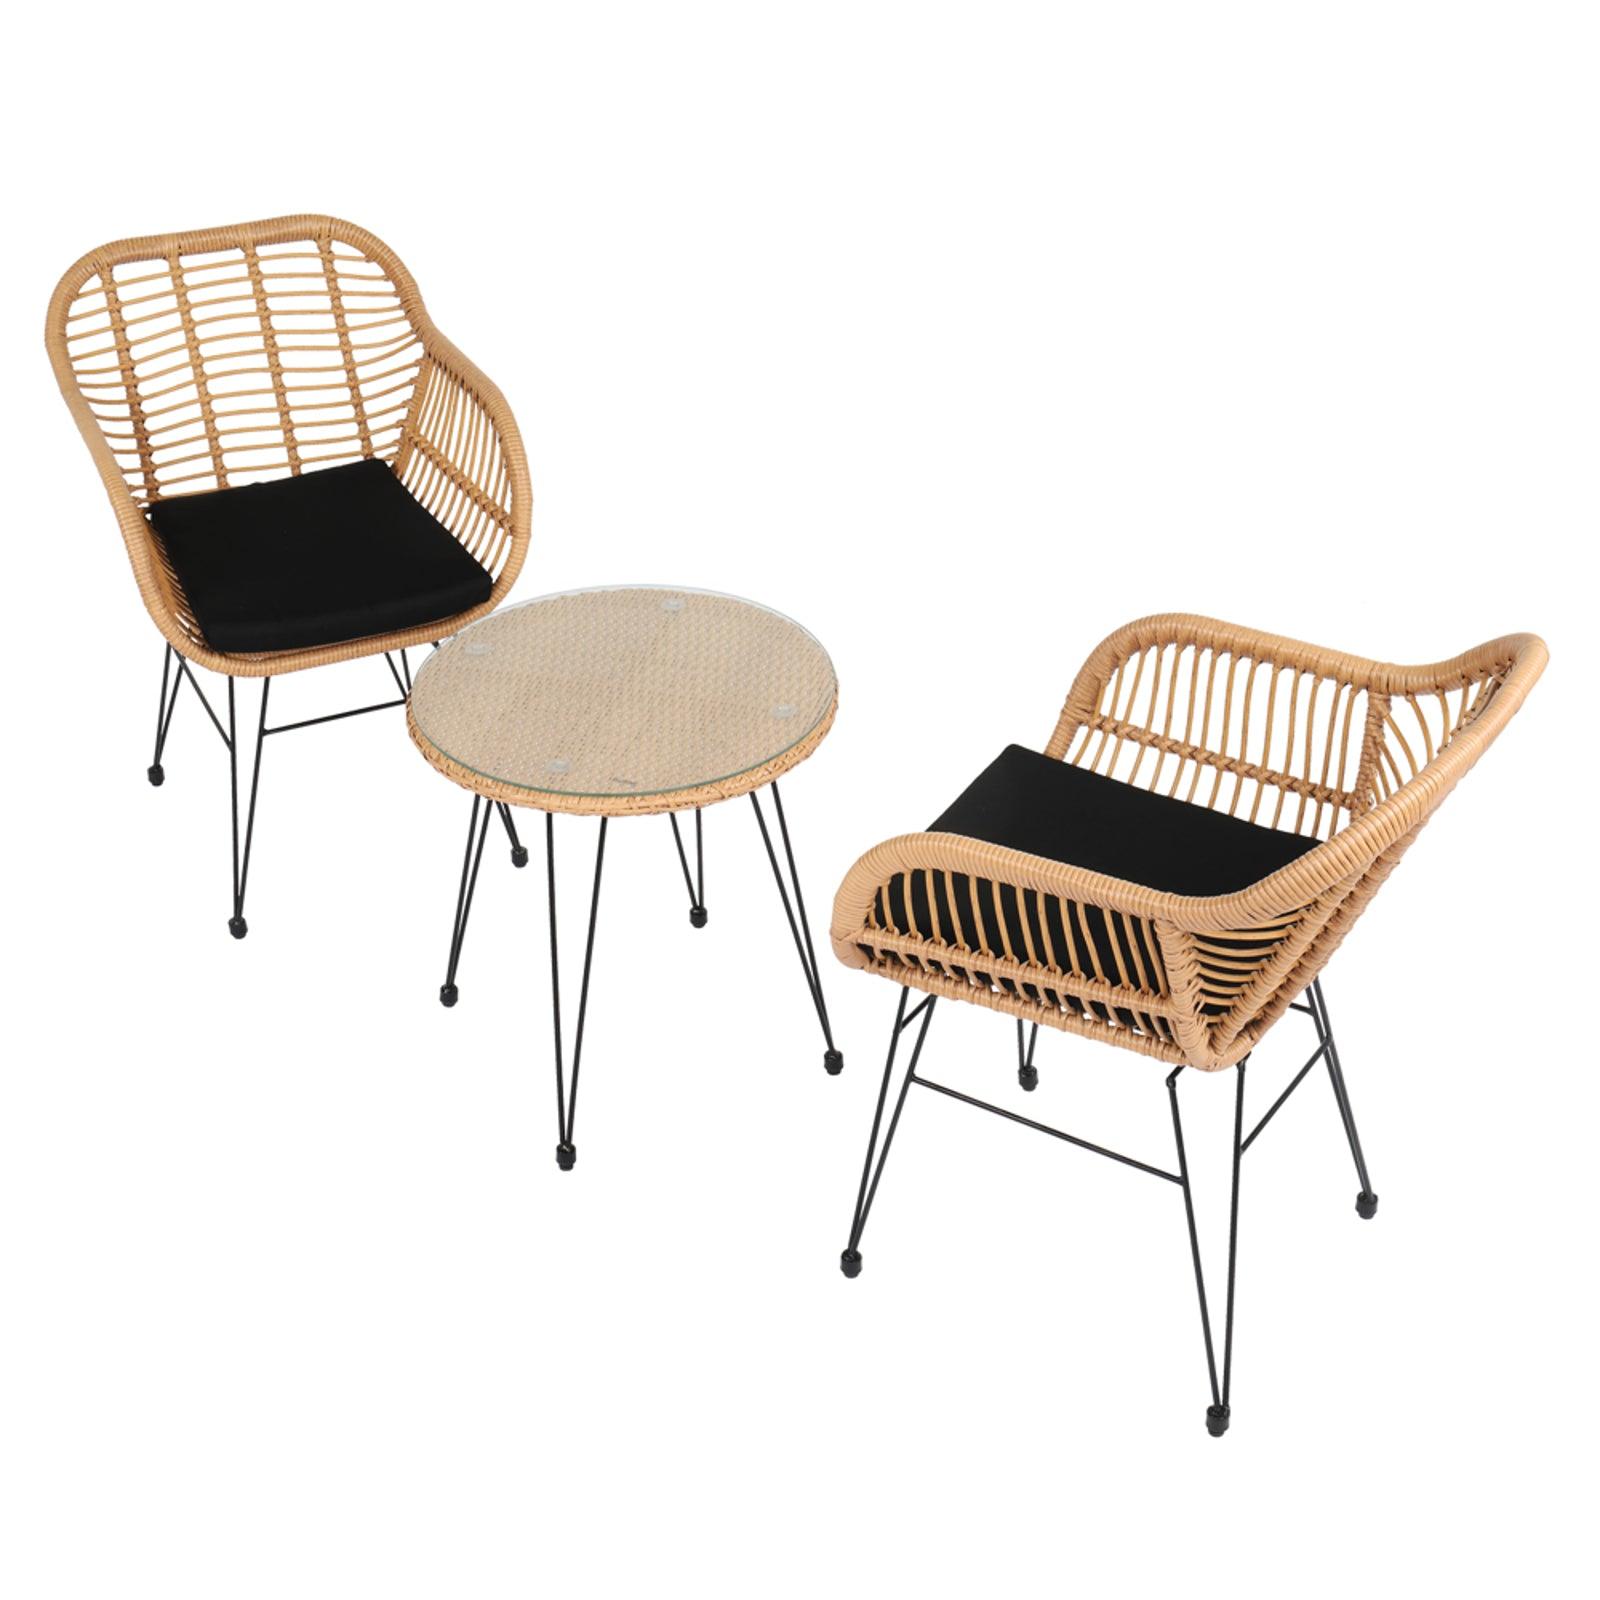 Wicker Rattan Patio 3 pcs Set with Tempered Glass Table Flaxen Yellow - Charming Spaces